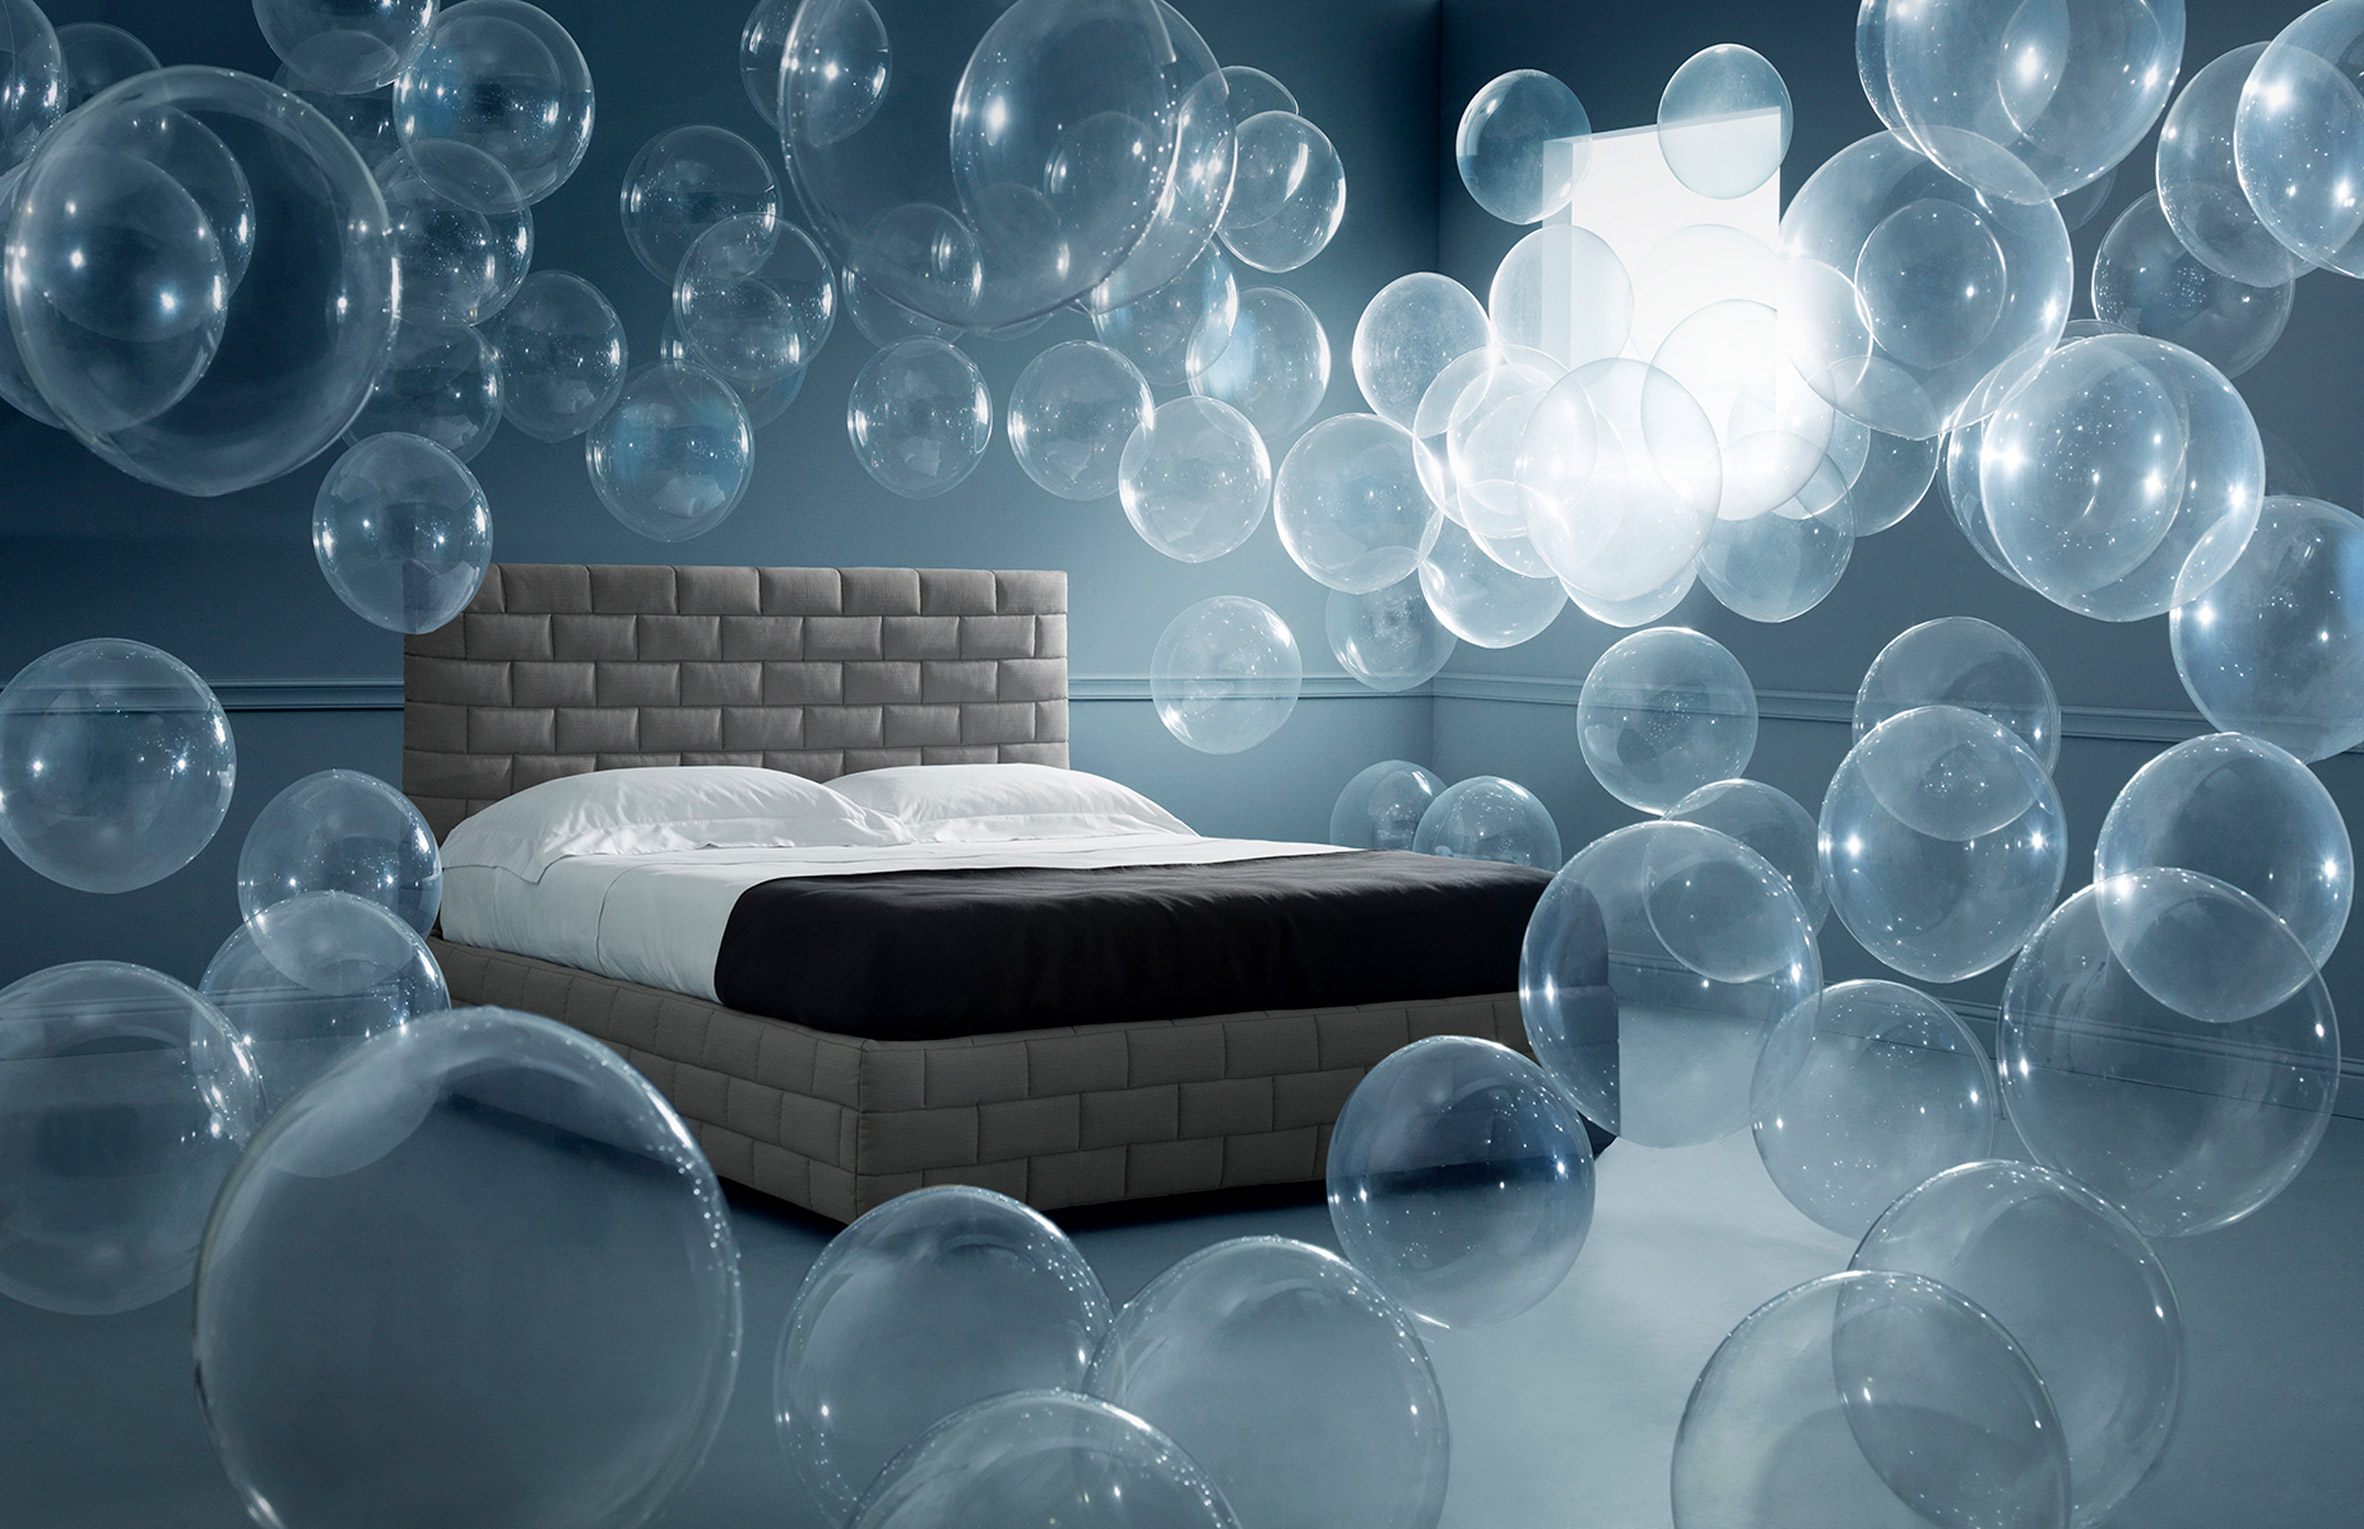 Fabio Novembre designs beds inspired by the world of dreams